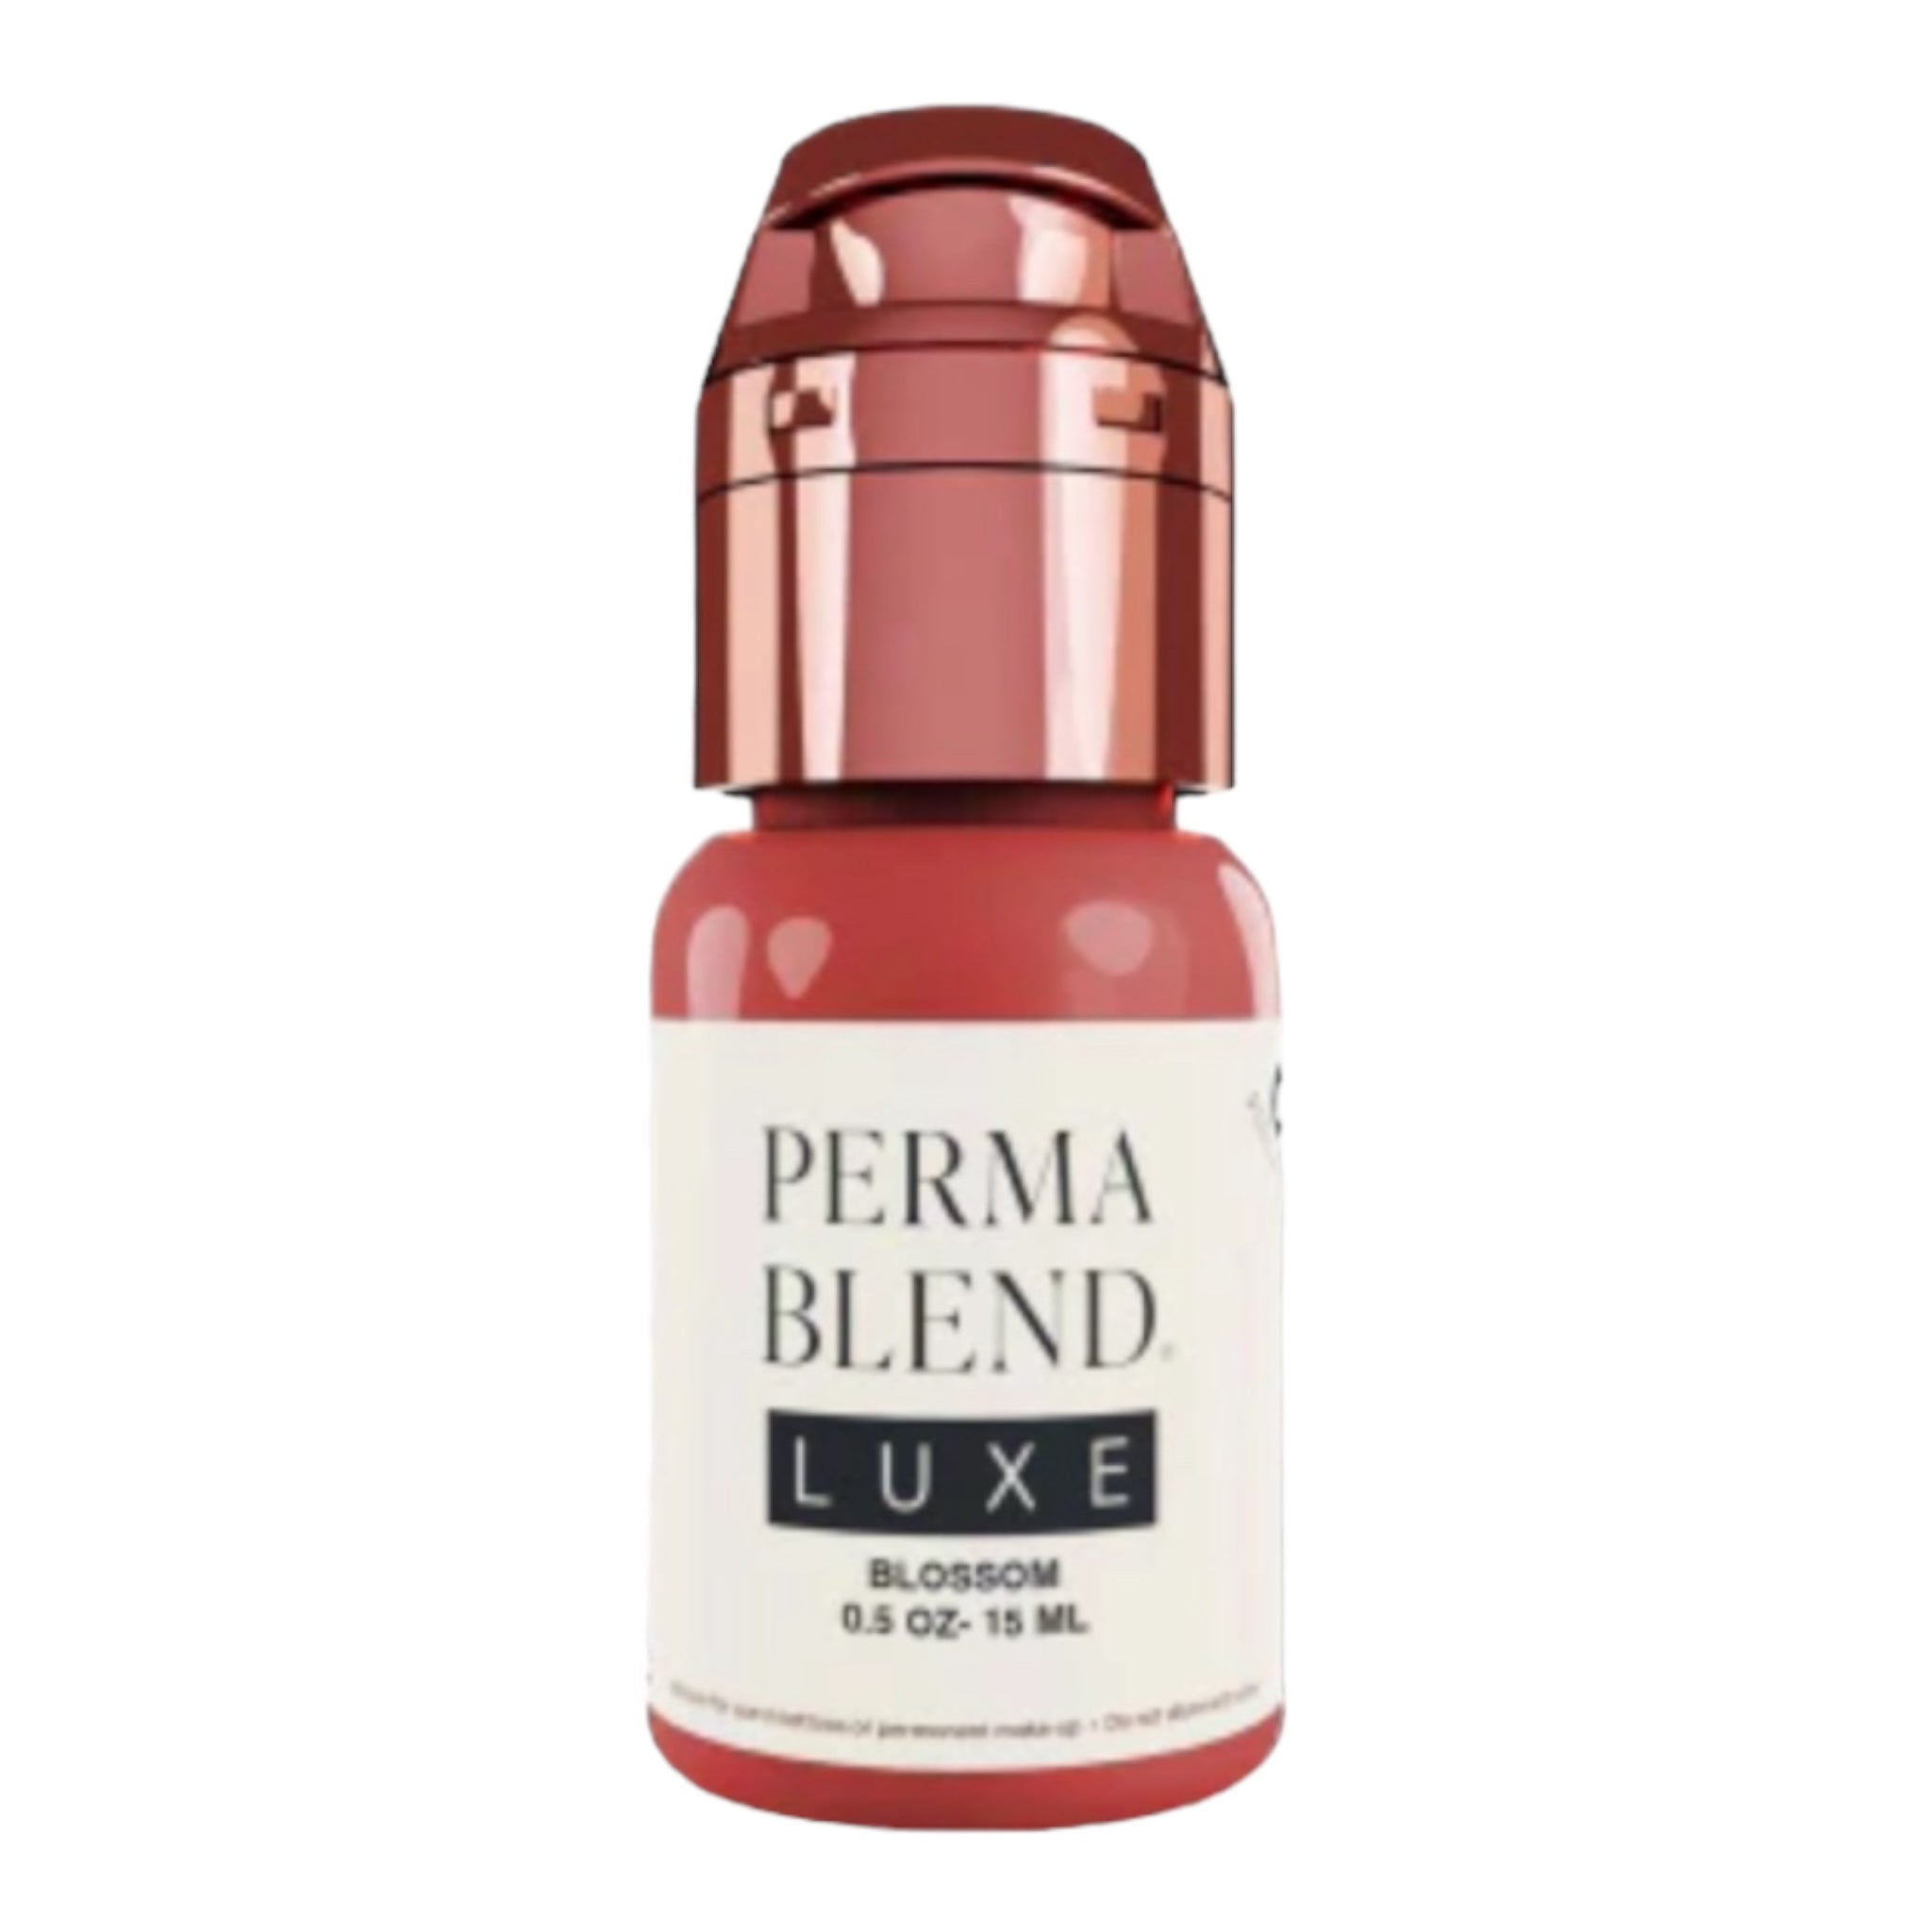 Encre Maquillage Perma Blend Luxe 15ml - Blossom